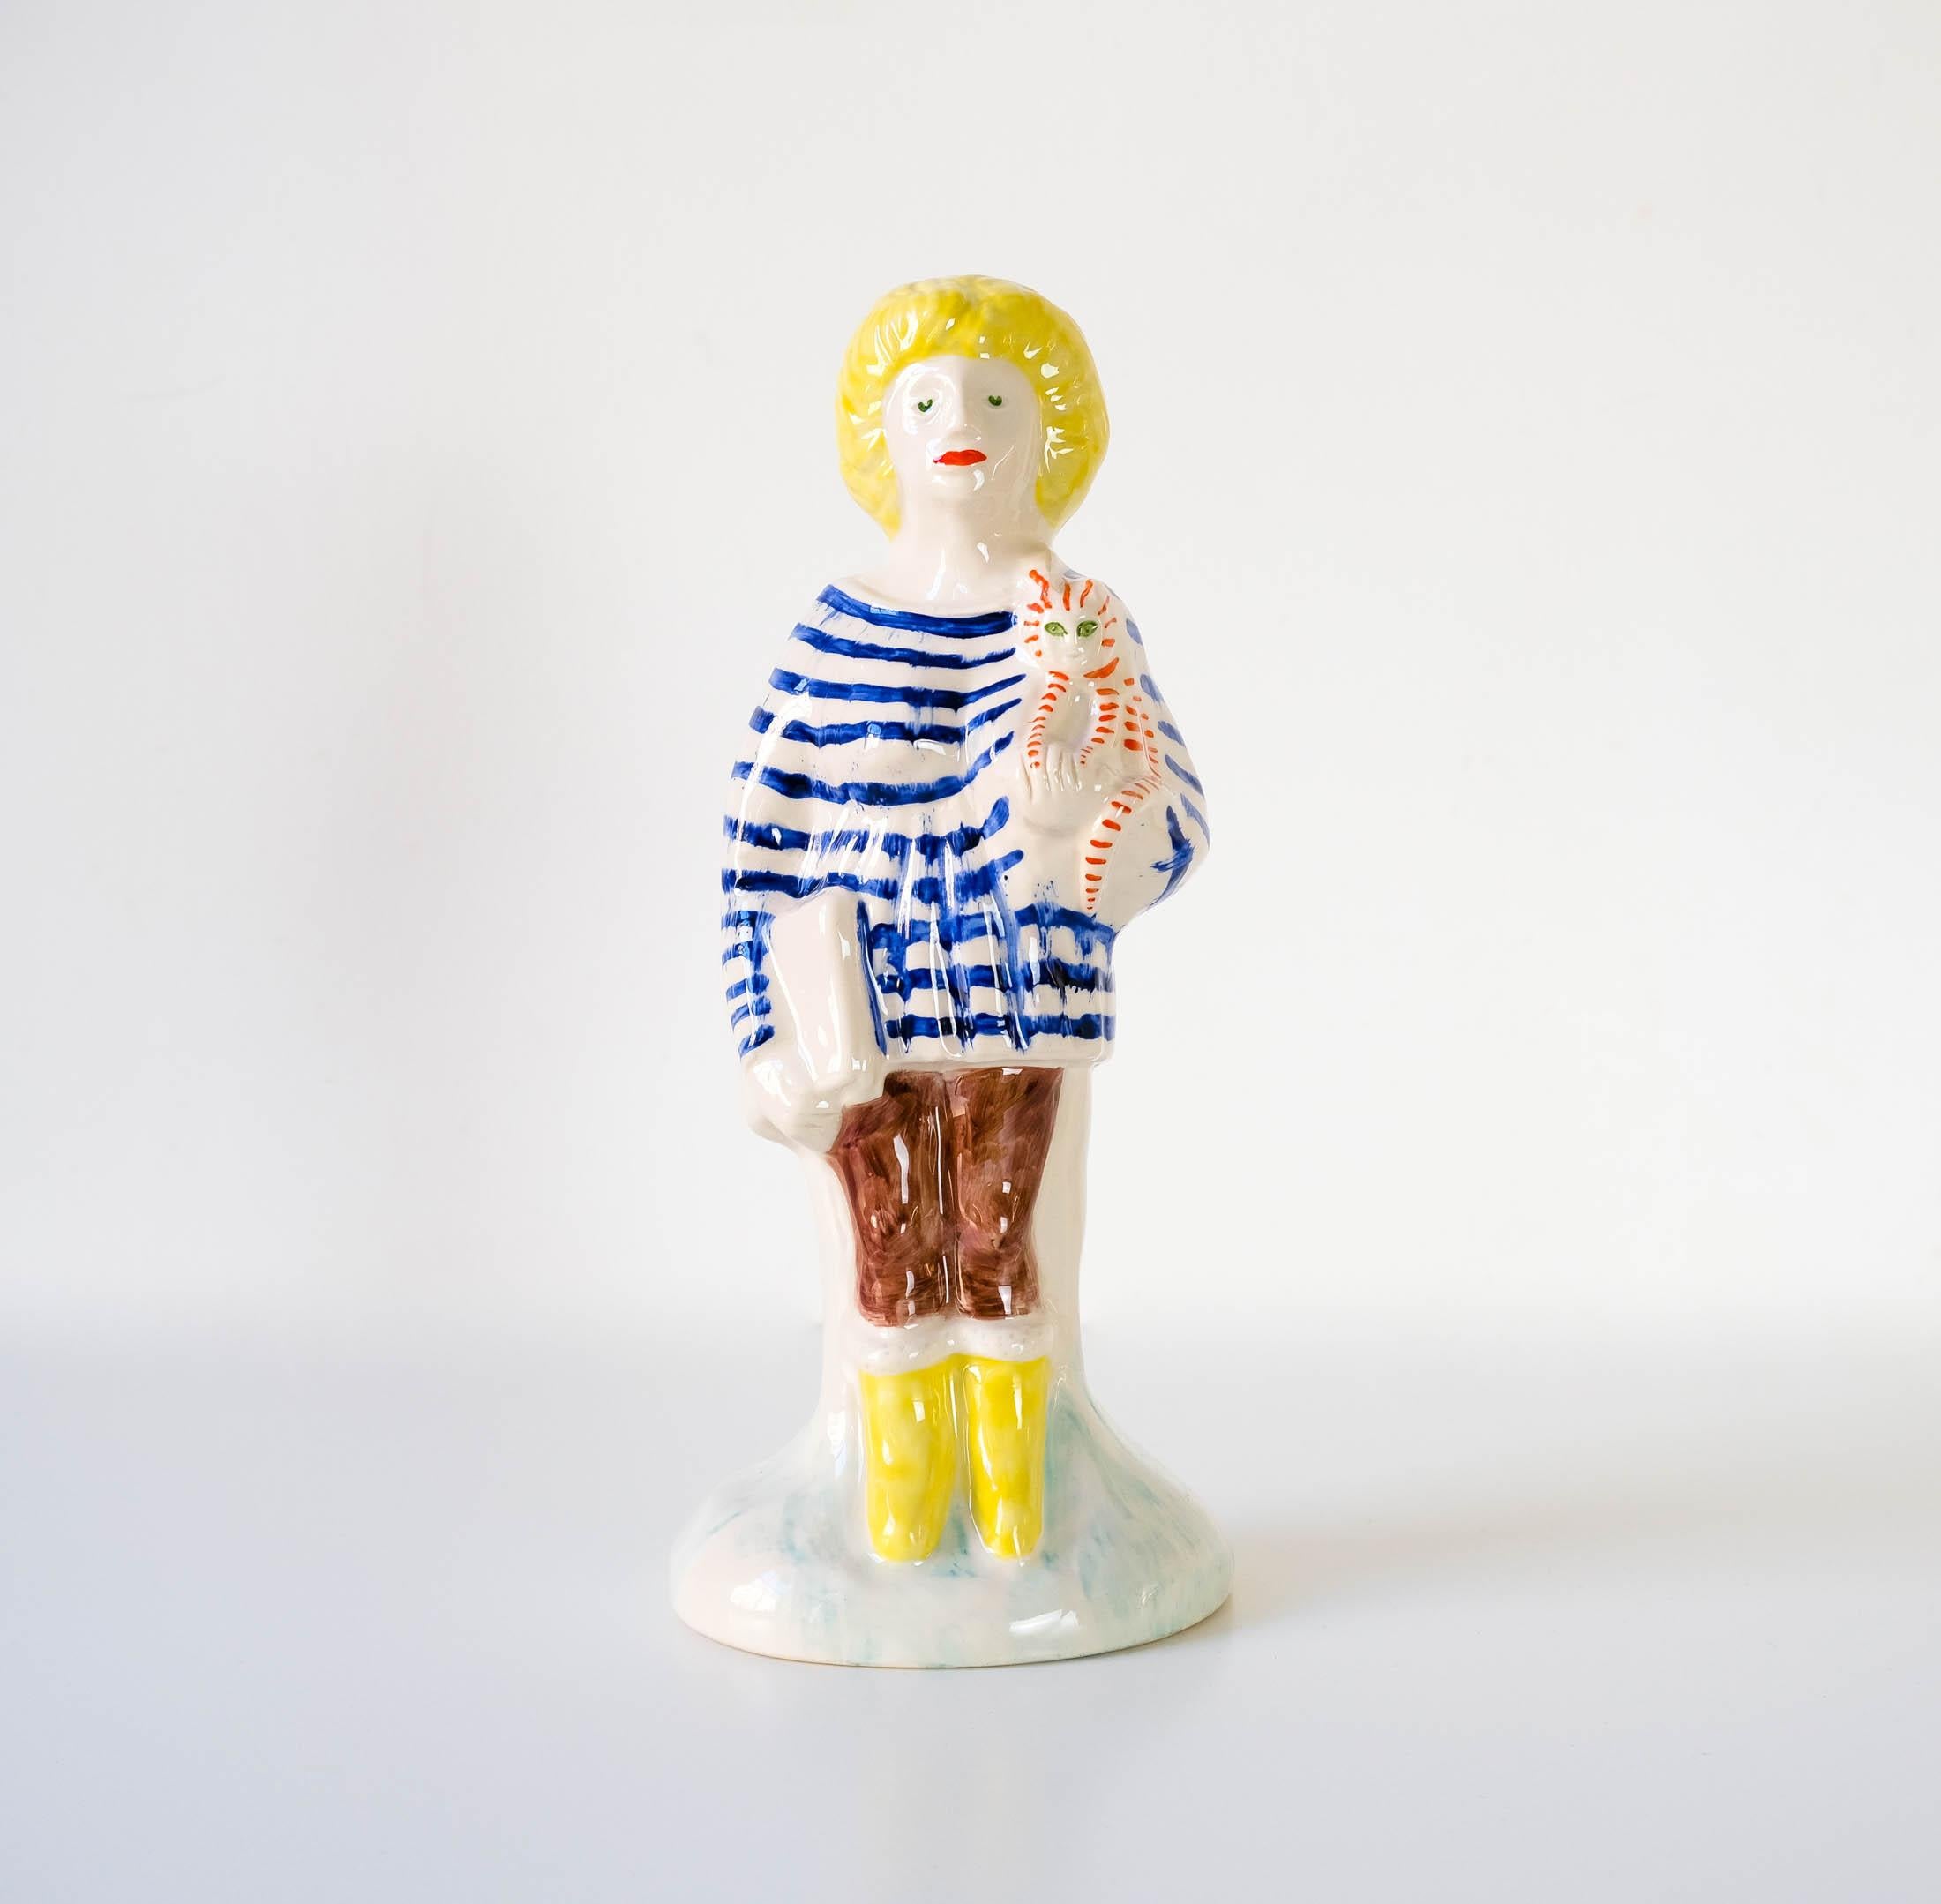 A Grayson Perry glazed ceramic hand painted Home Worker Staffordshire Figure, which is part of his 